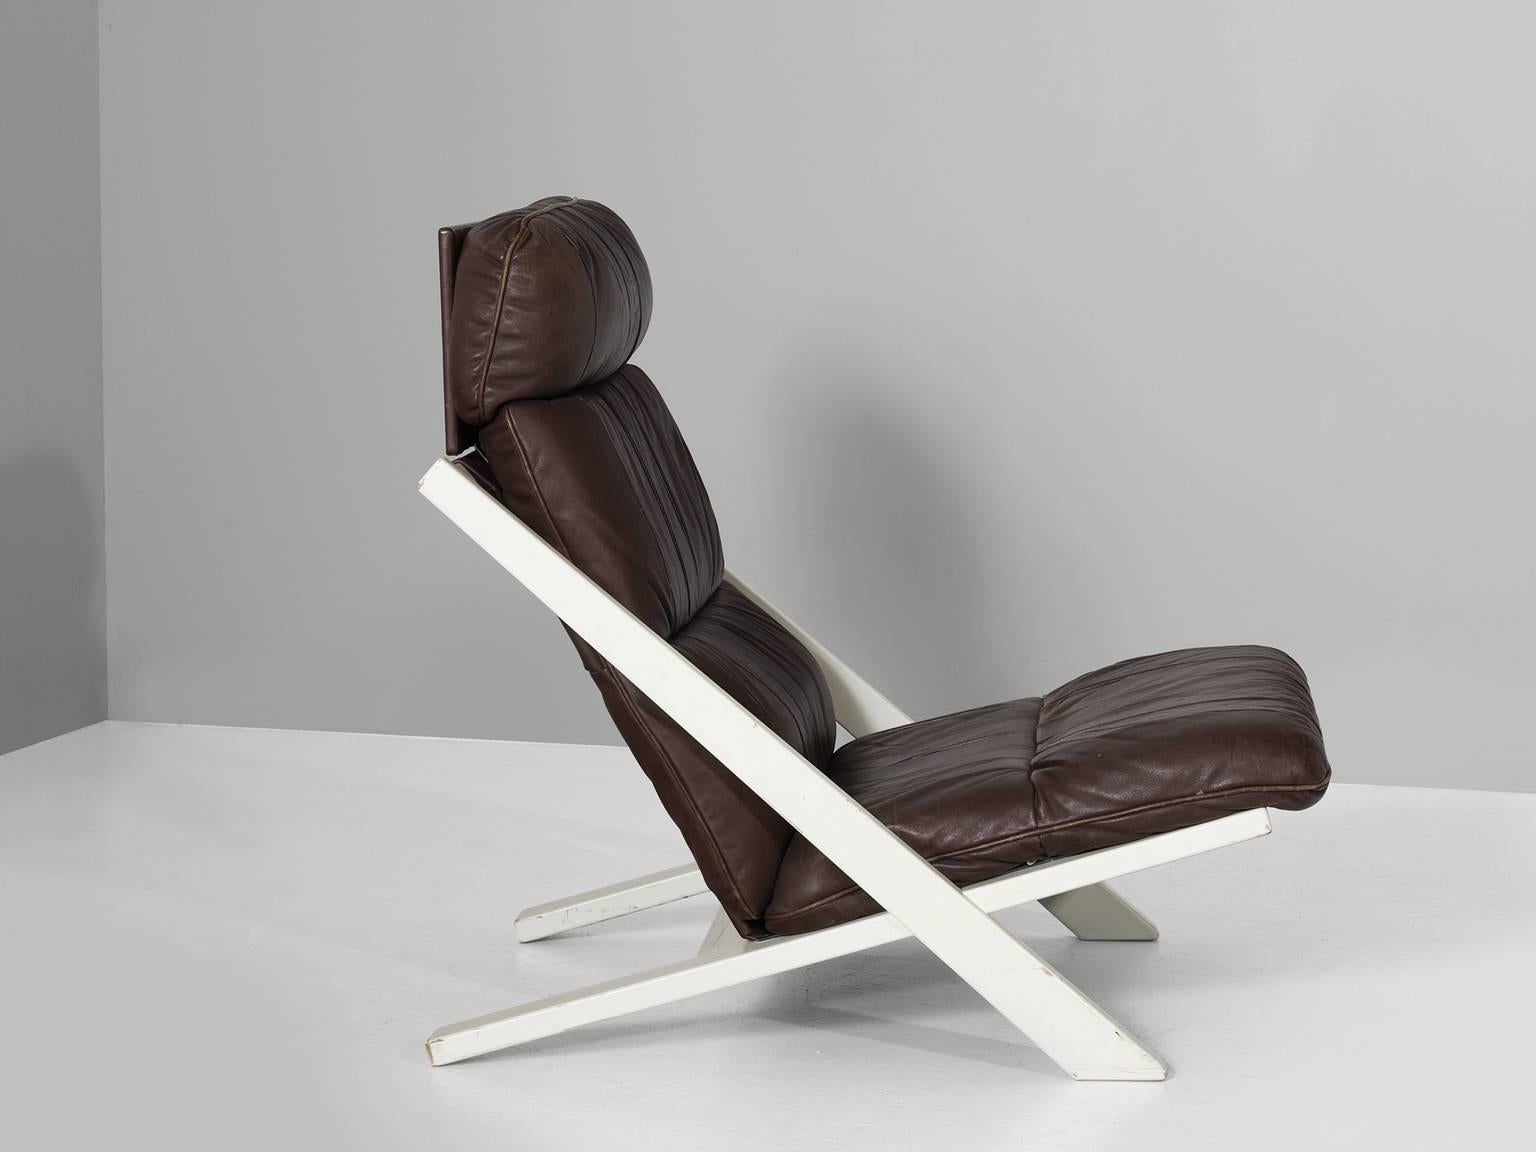 Lounge chair, in wood and leather by Uli bergere for De Sede, Switzerland 1970s.

High back lounge chair by de Swiss quality manufacturer De Sede. The X-shaped frame consists of white lacquered wood. This makes an interesting contrast to the warm